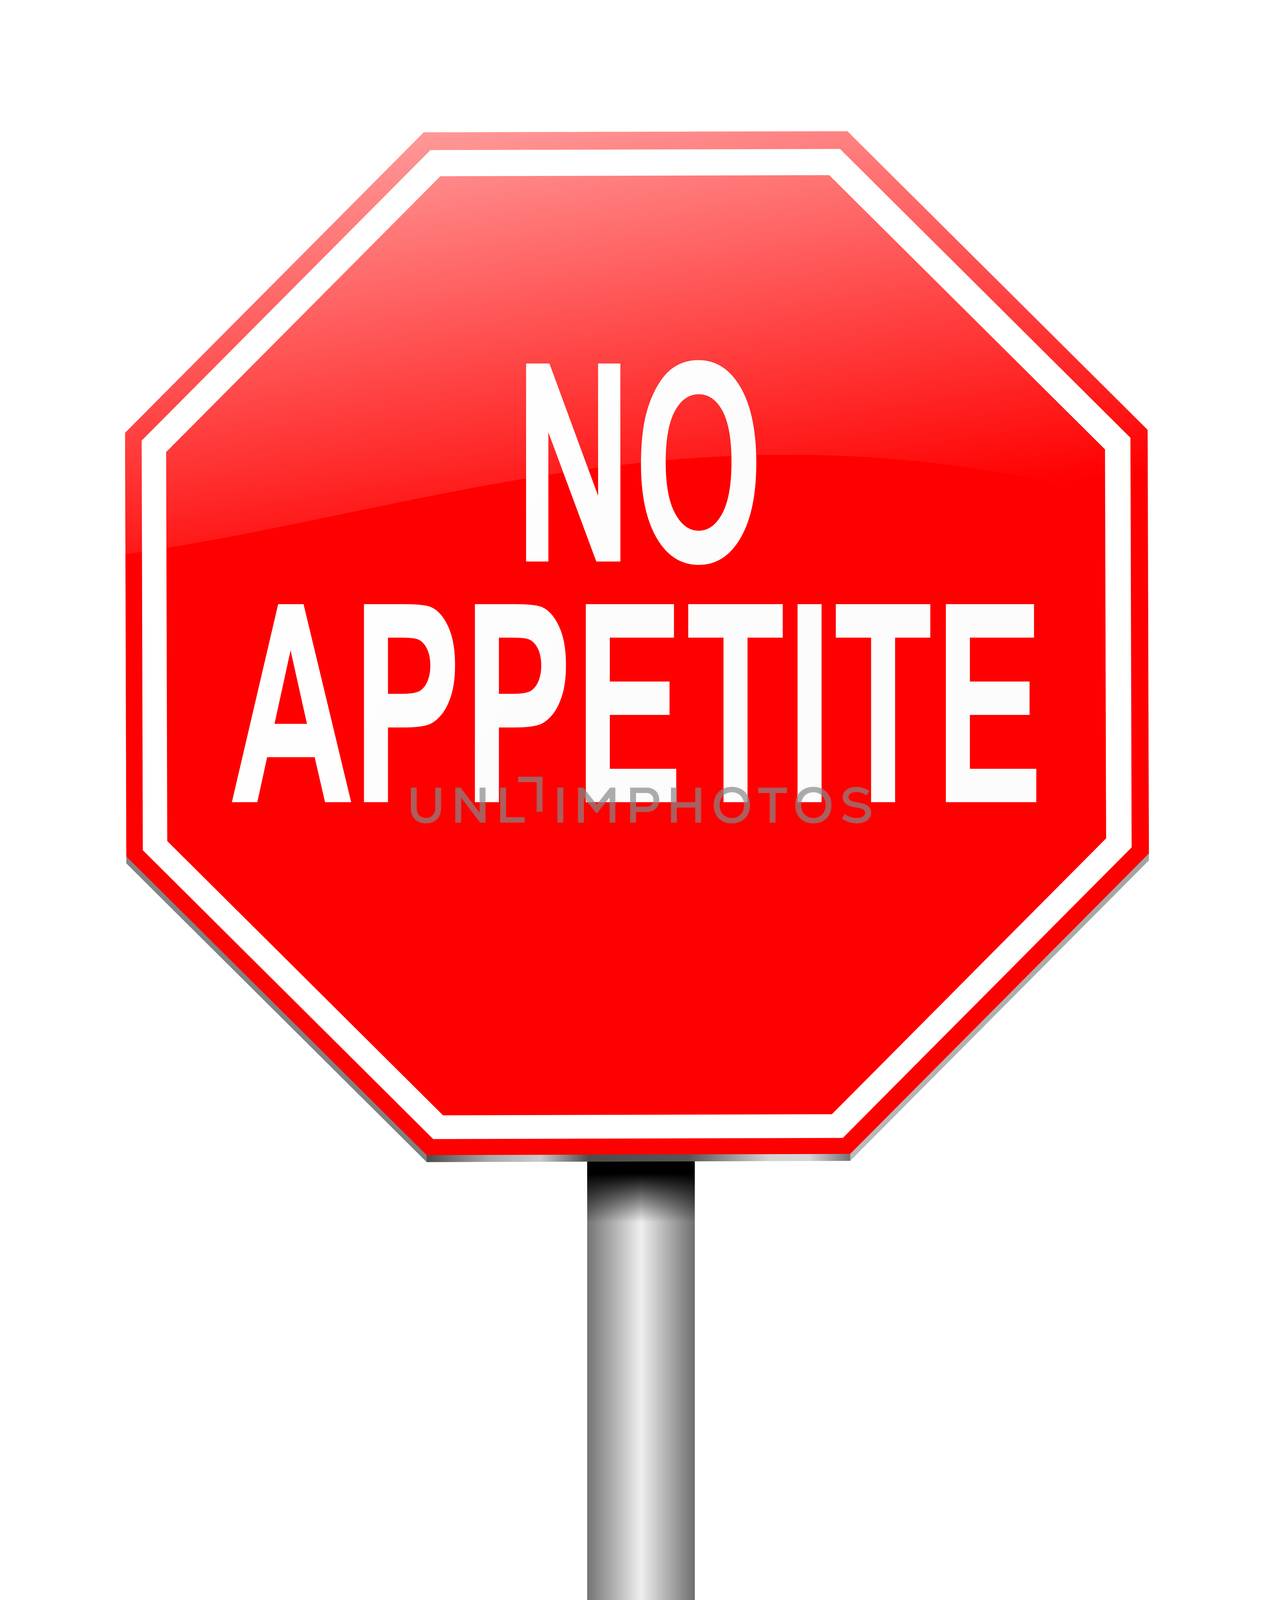 Illustration depicting a sign with a no appetite concept.